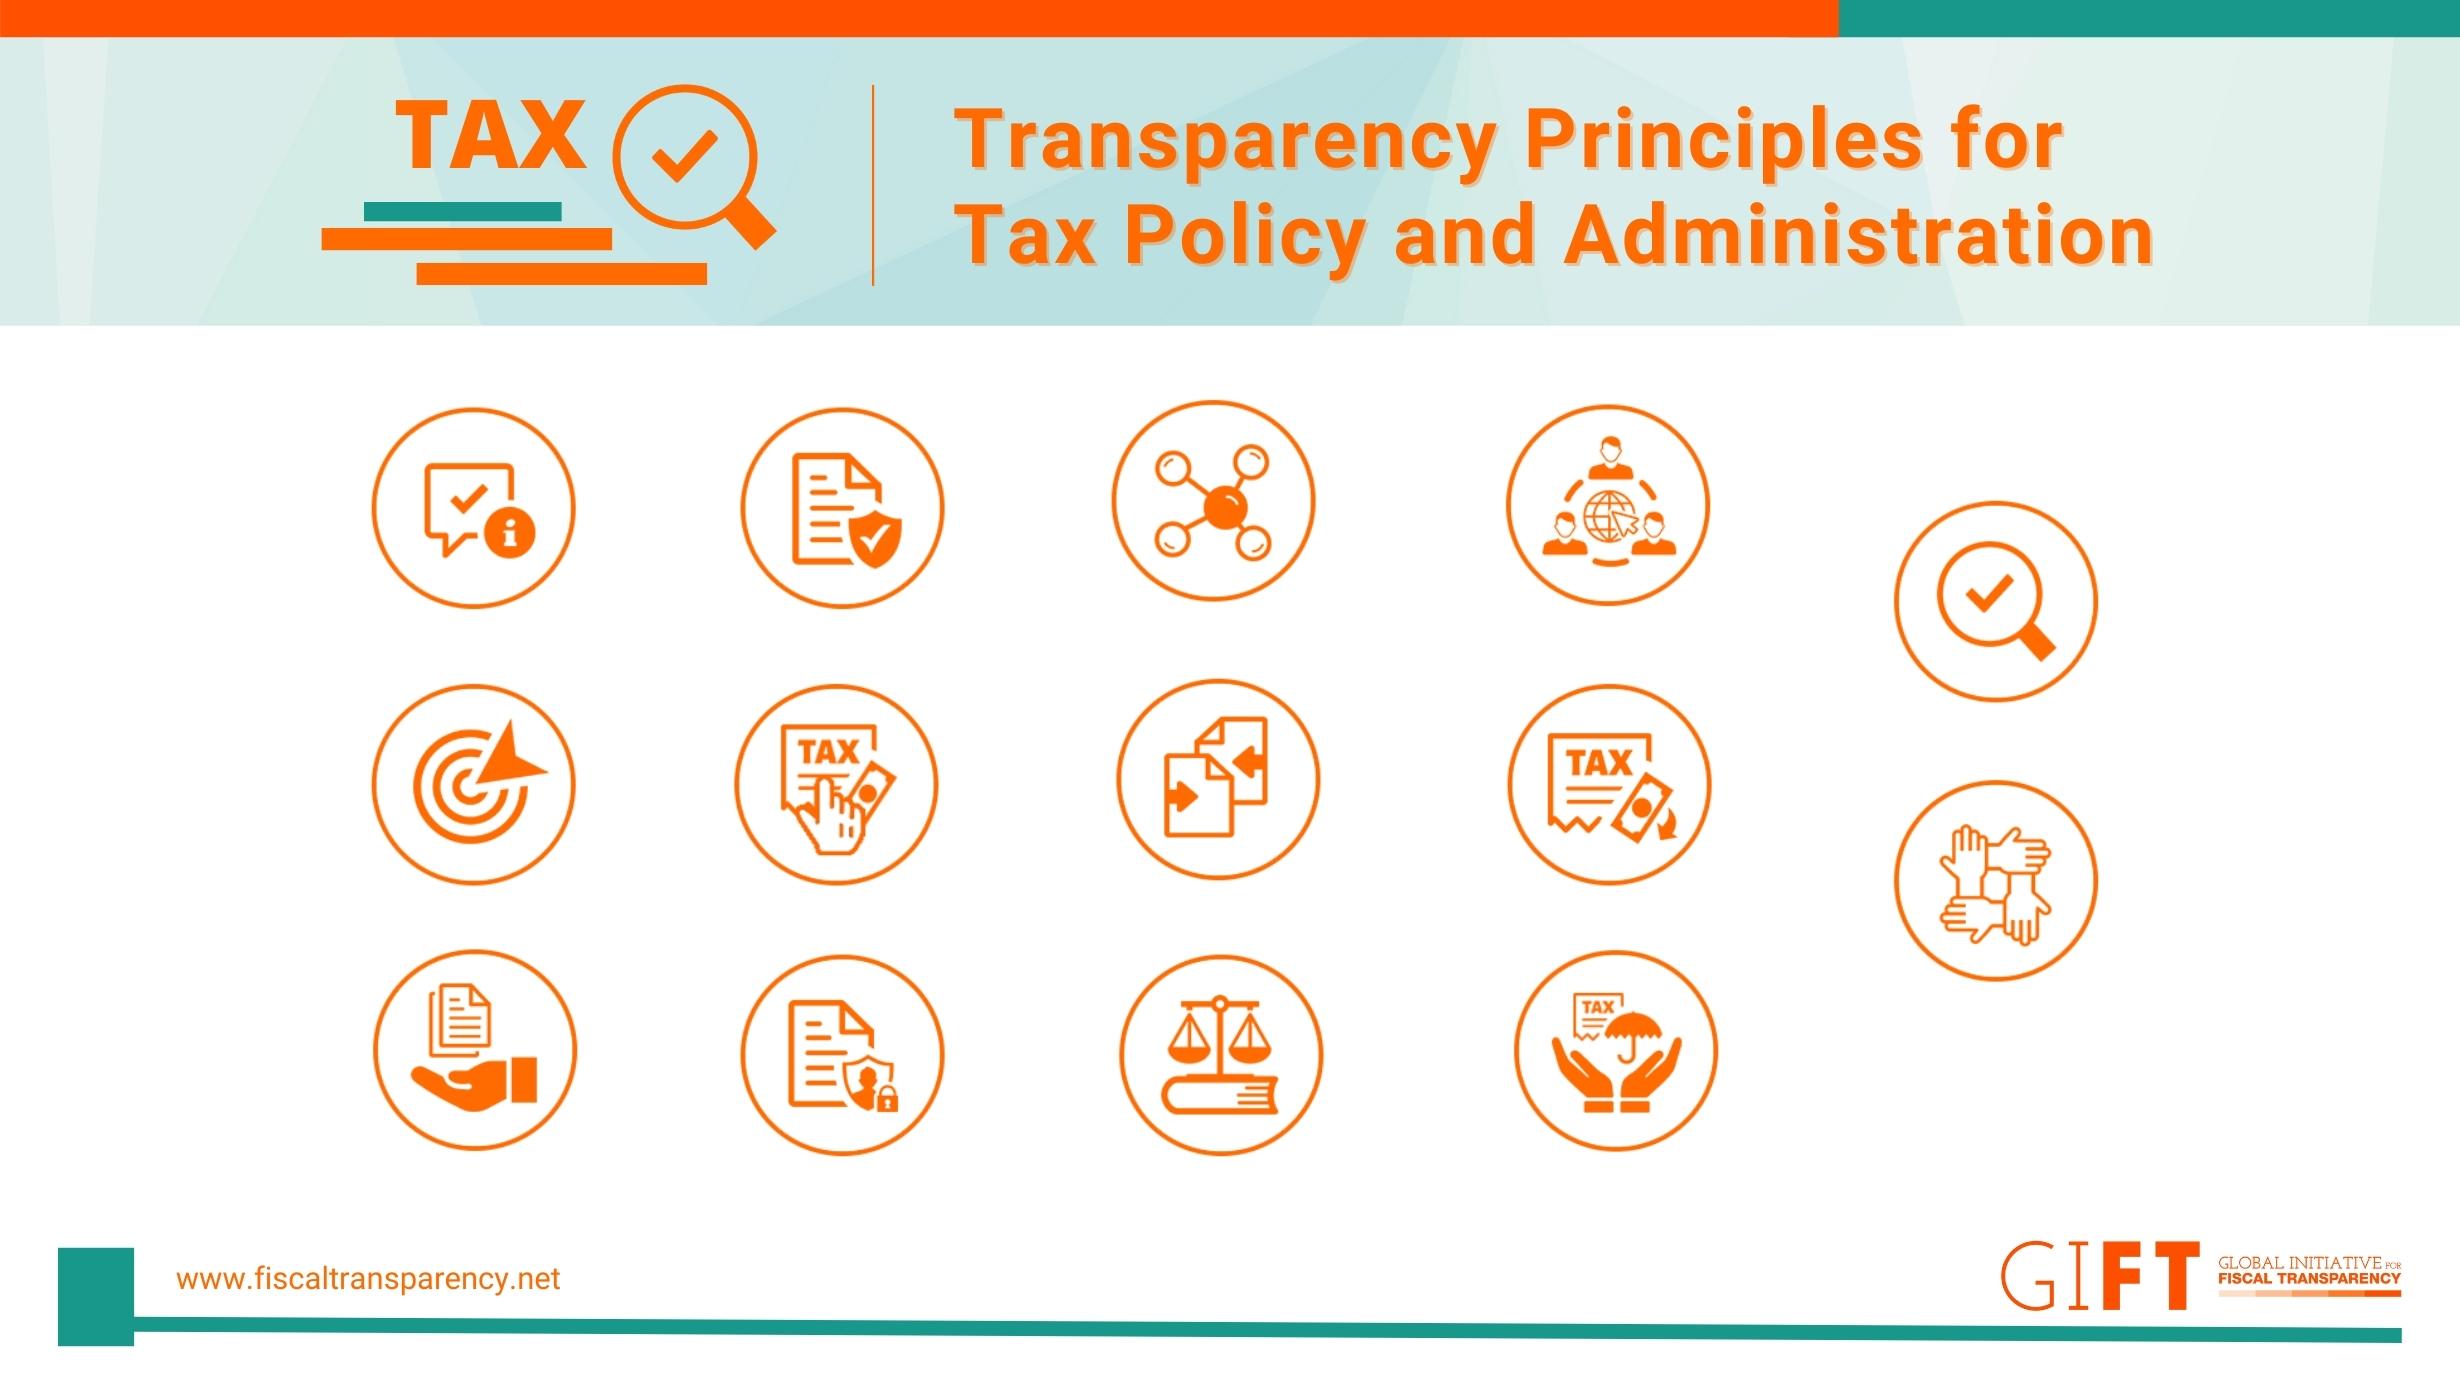 Developing and Using Global Tax Transparency Principles